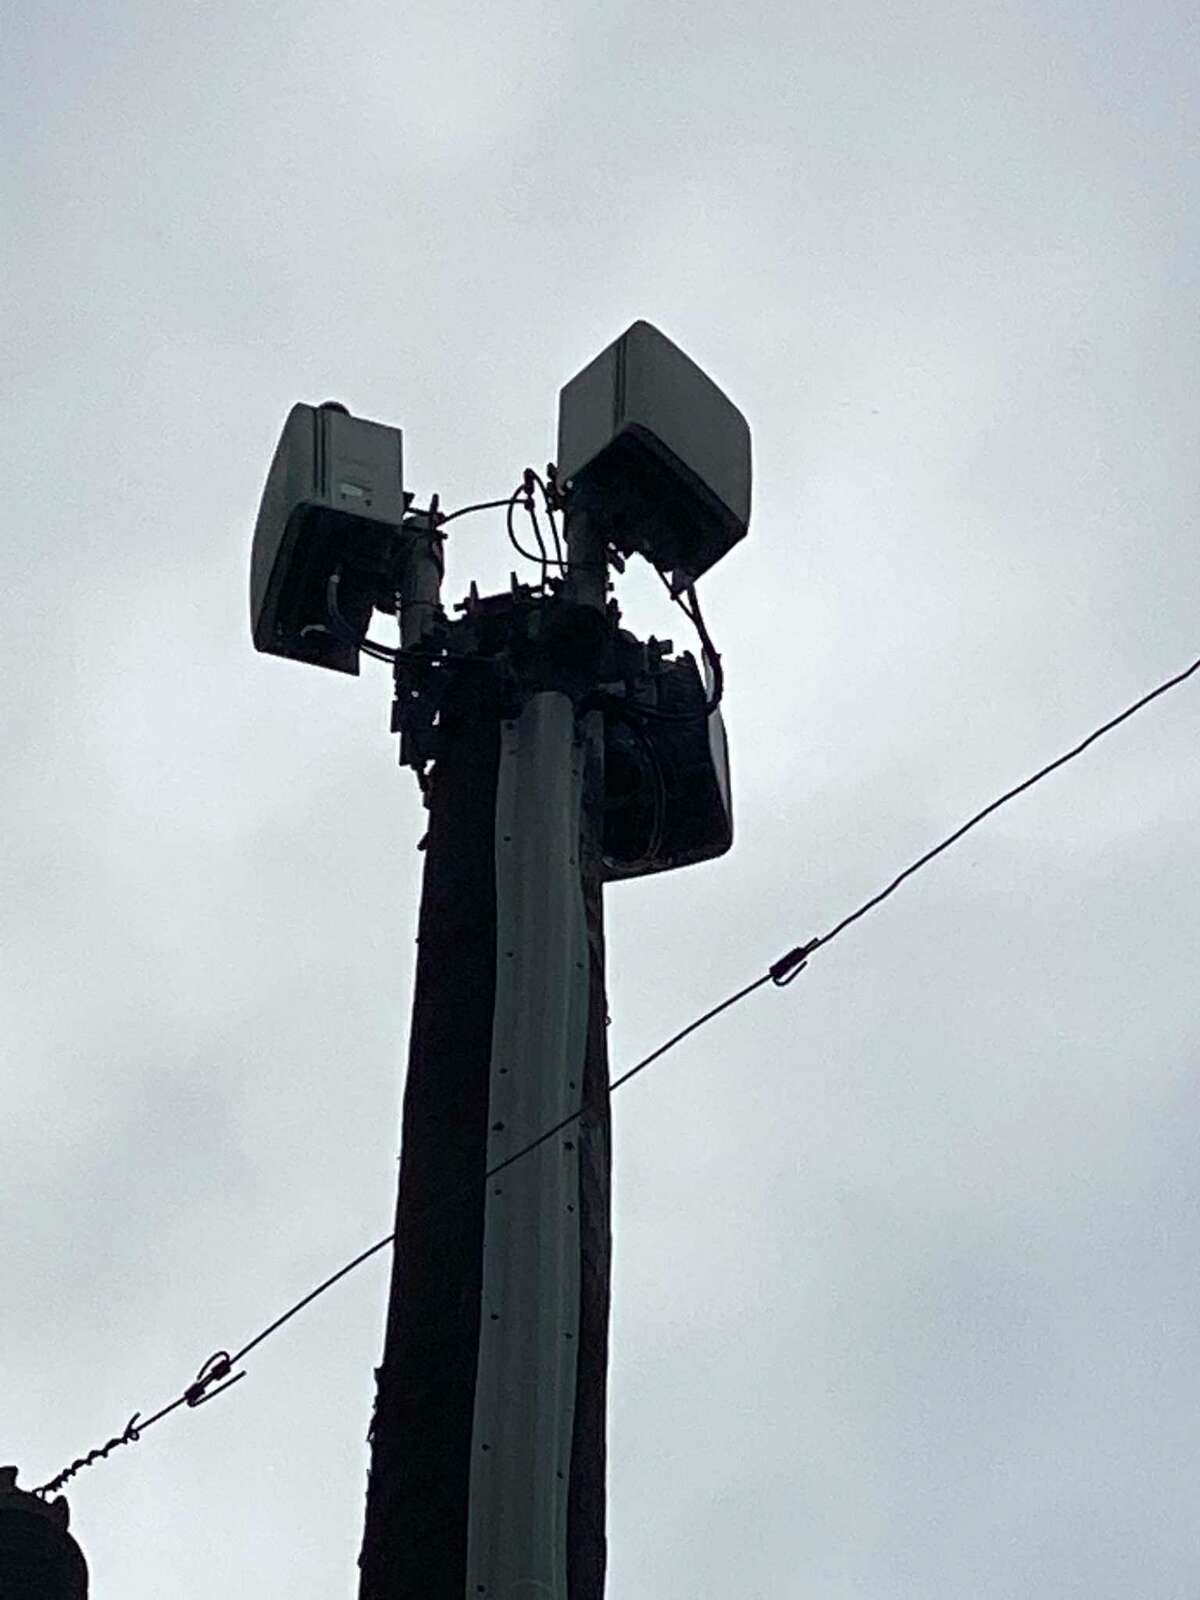 Verizon’s 5G transmitters are small and placed atop utility poles.